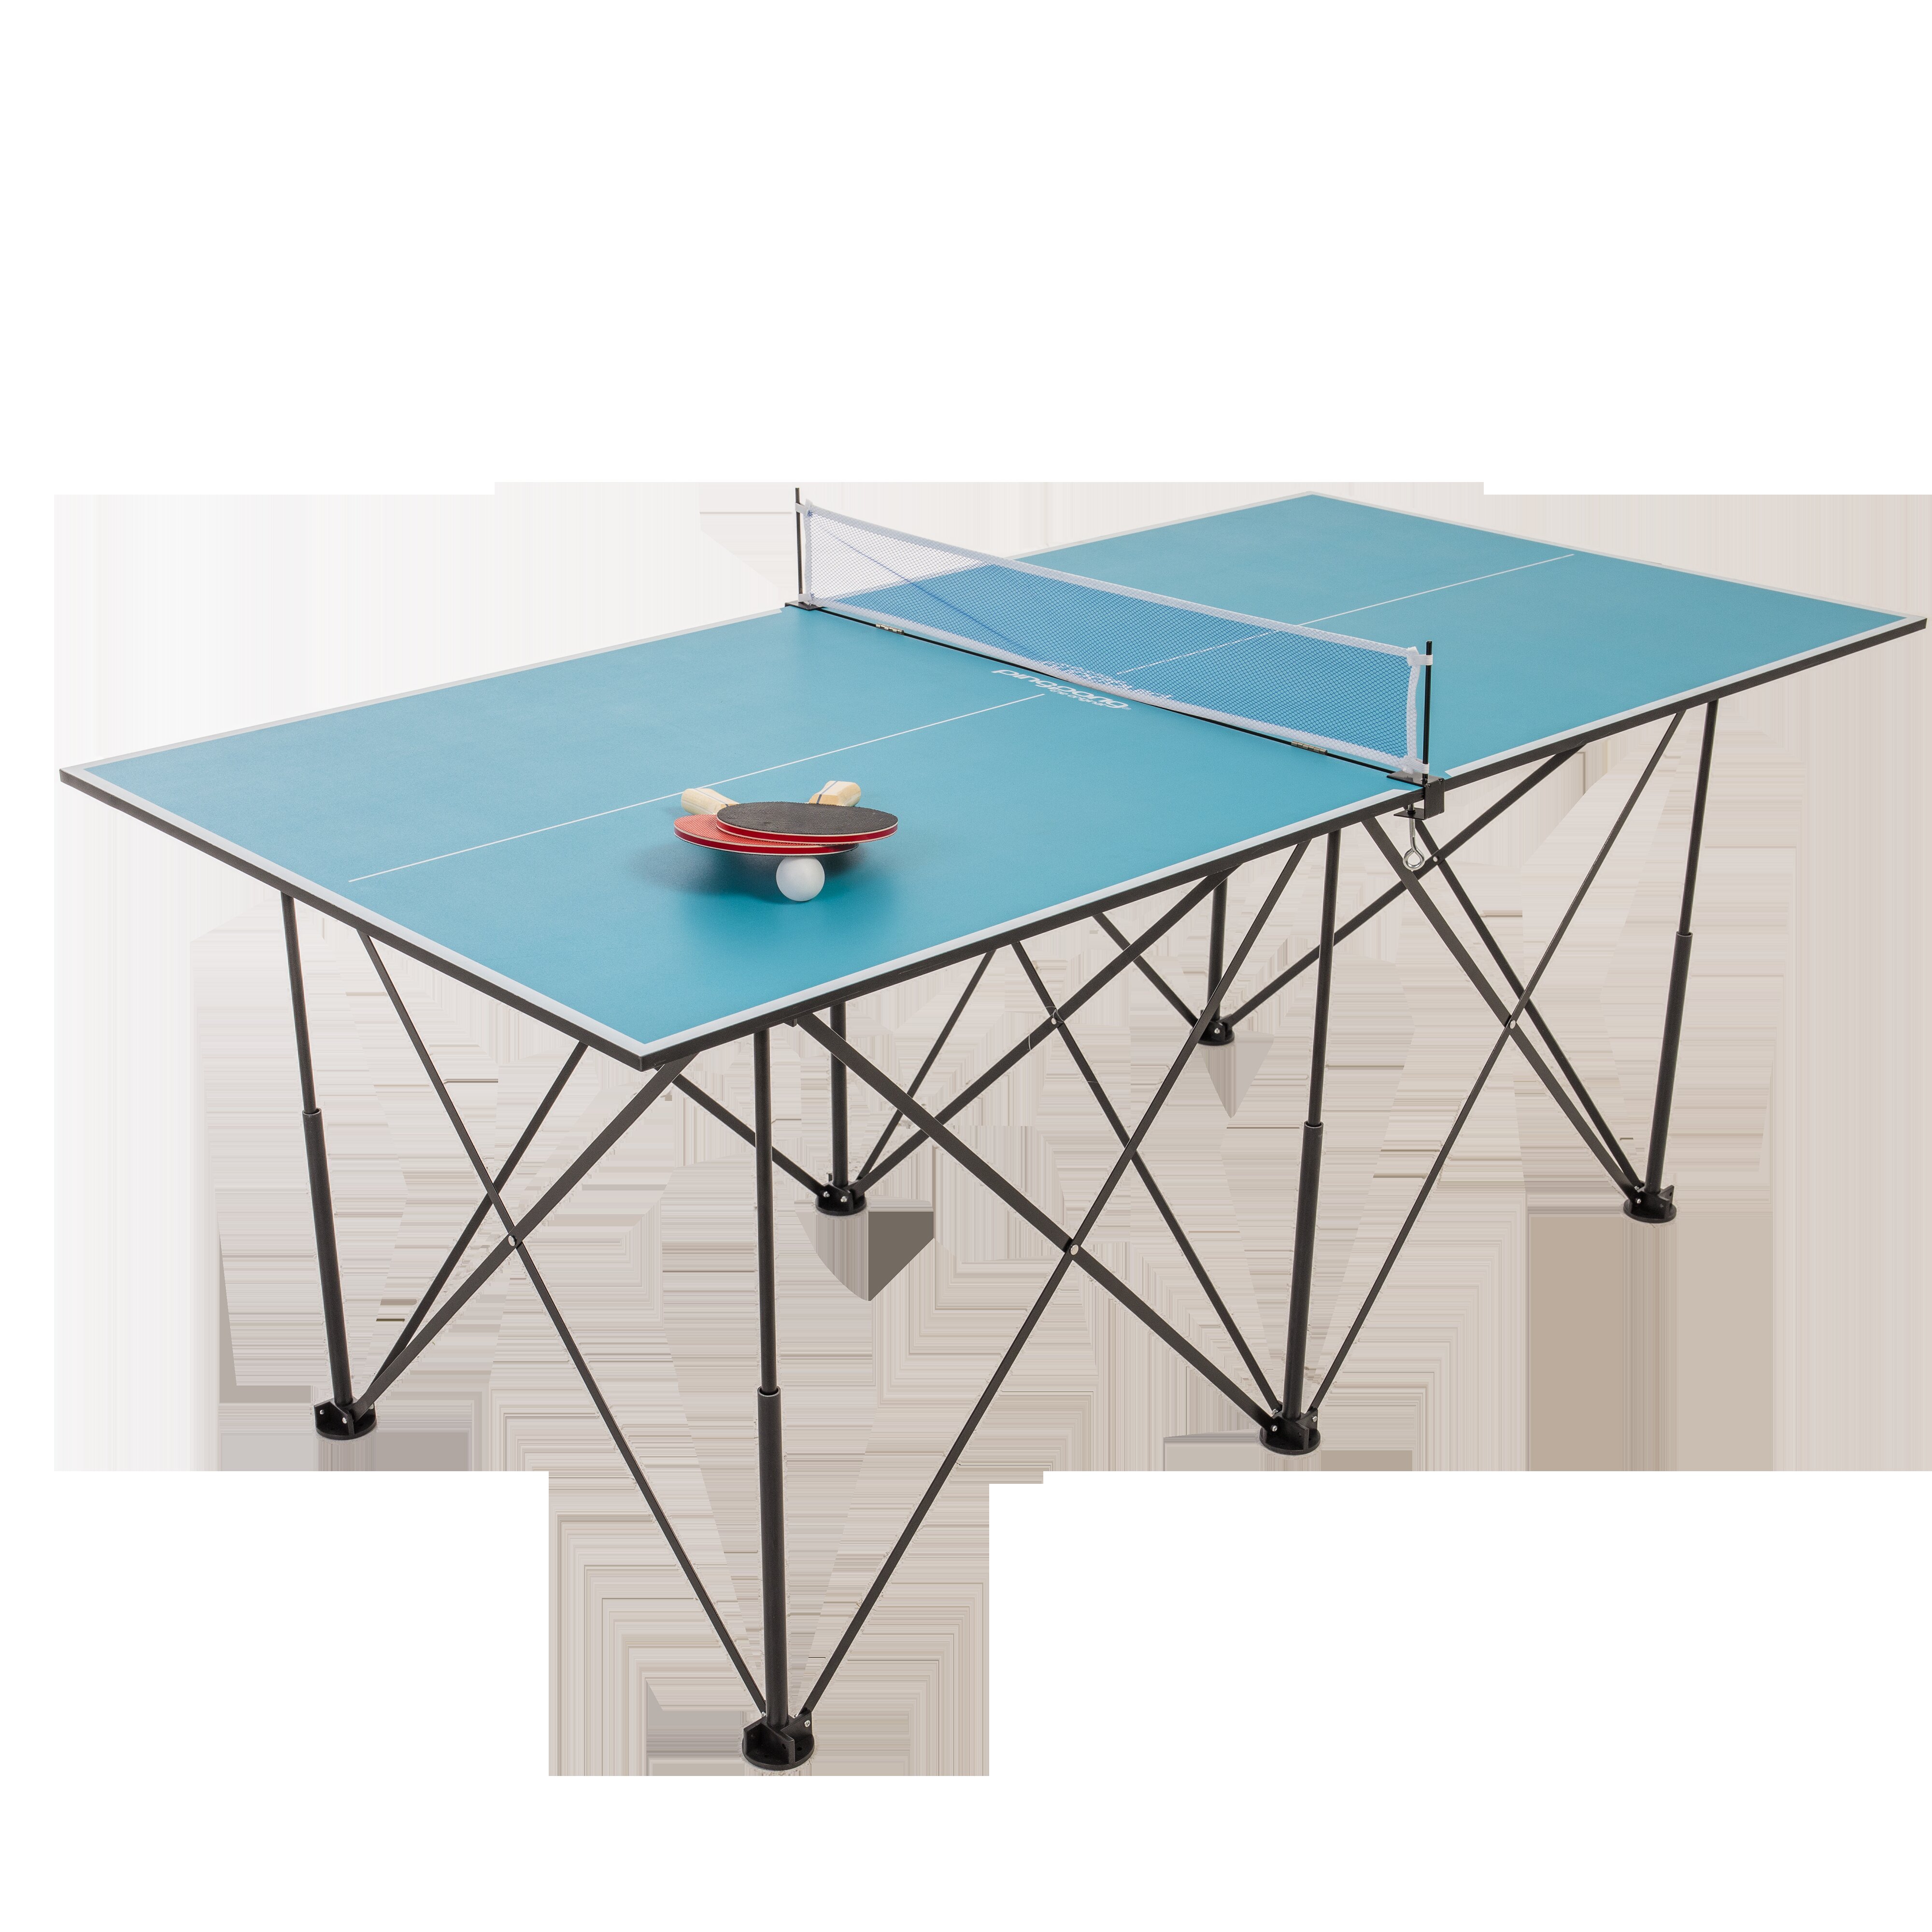 Folding Table for Indoor and Outdoor Blue Greensen Table Ping Pong Table Tennis Set with Ping Pong Table and Rackets 152 x 76.2 x 76.3 cm 